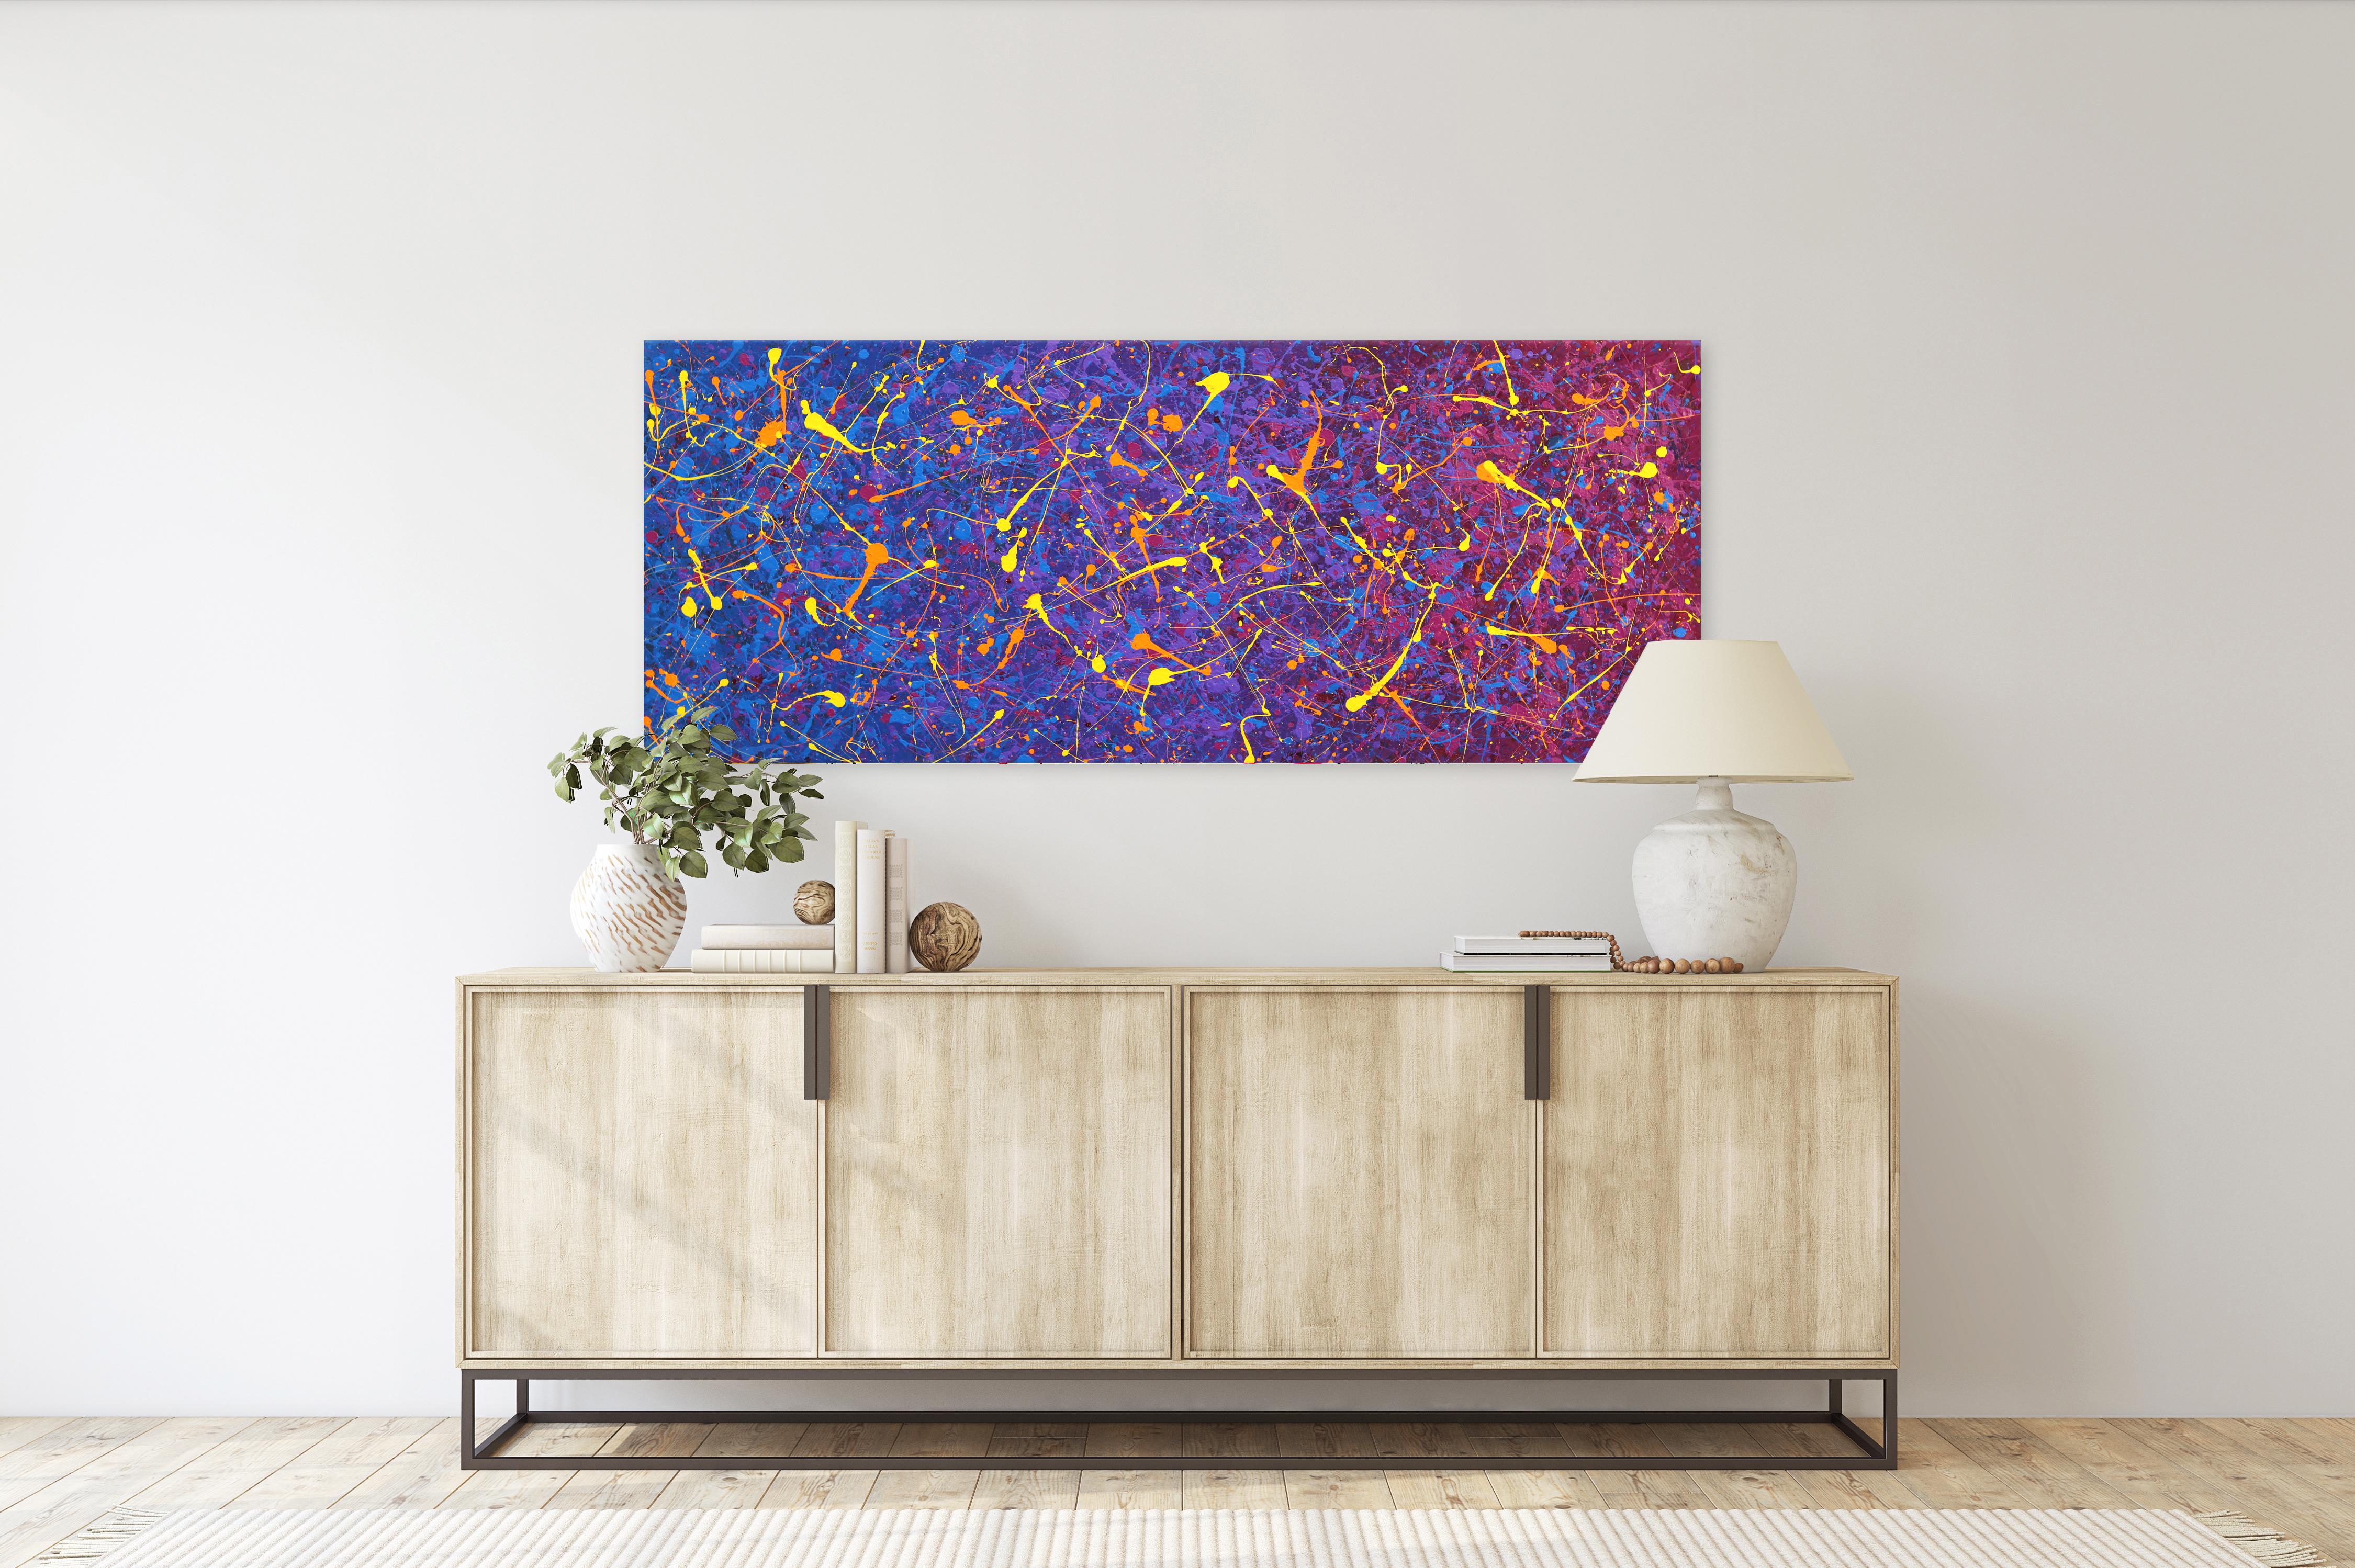 Meteor Shower - Vibrant Colorful Original Expressionist Action Painting - Abstract Expressionist Mixed Media Art by Marc Raphael